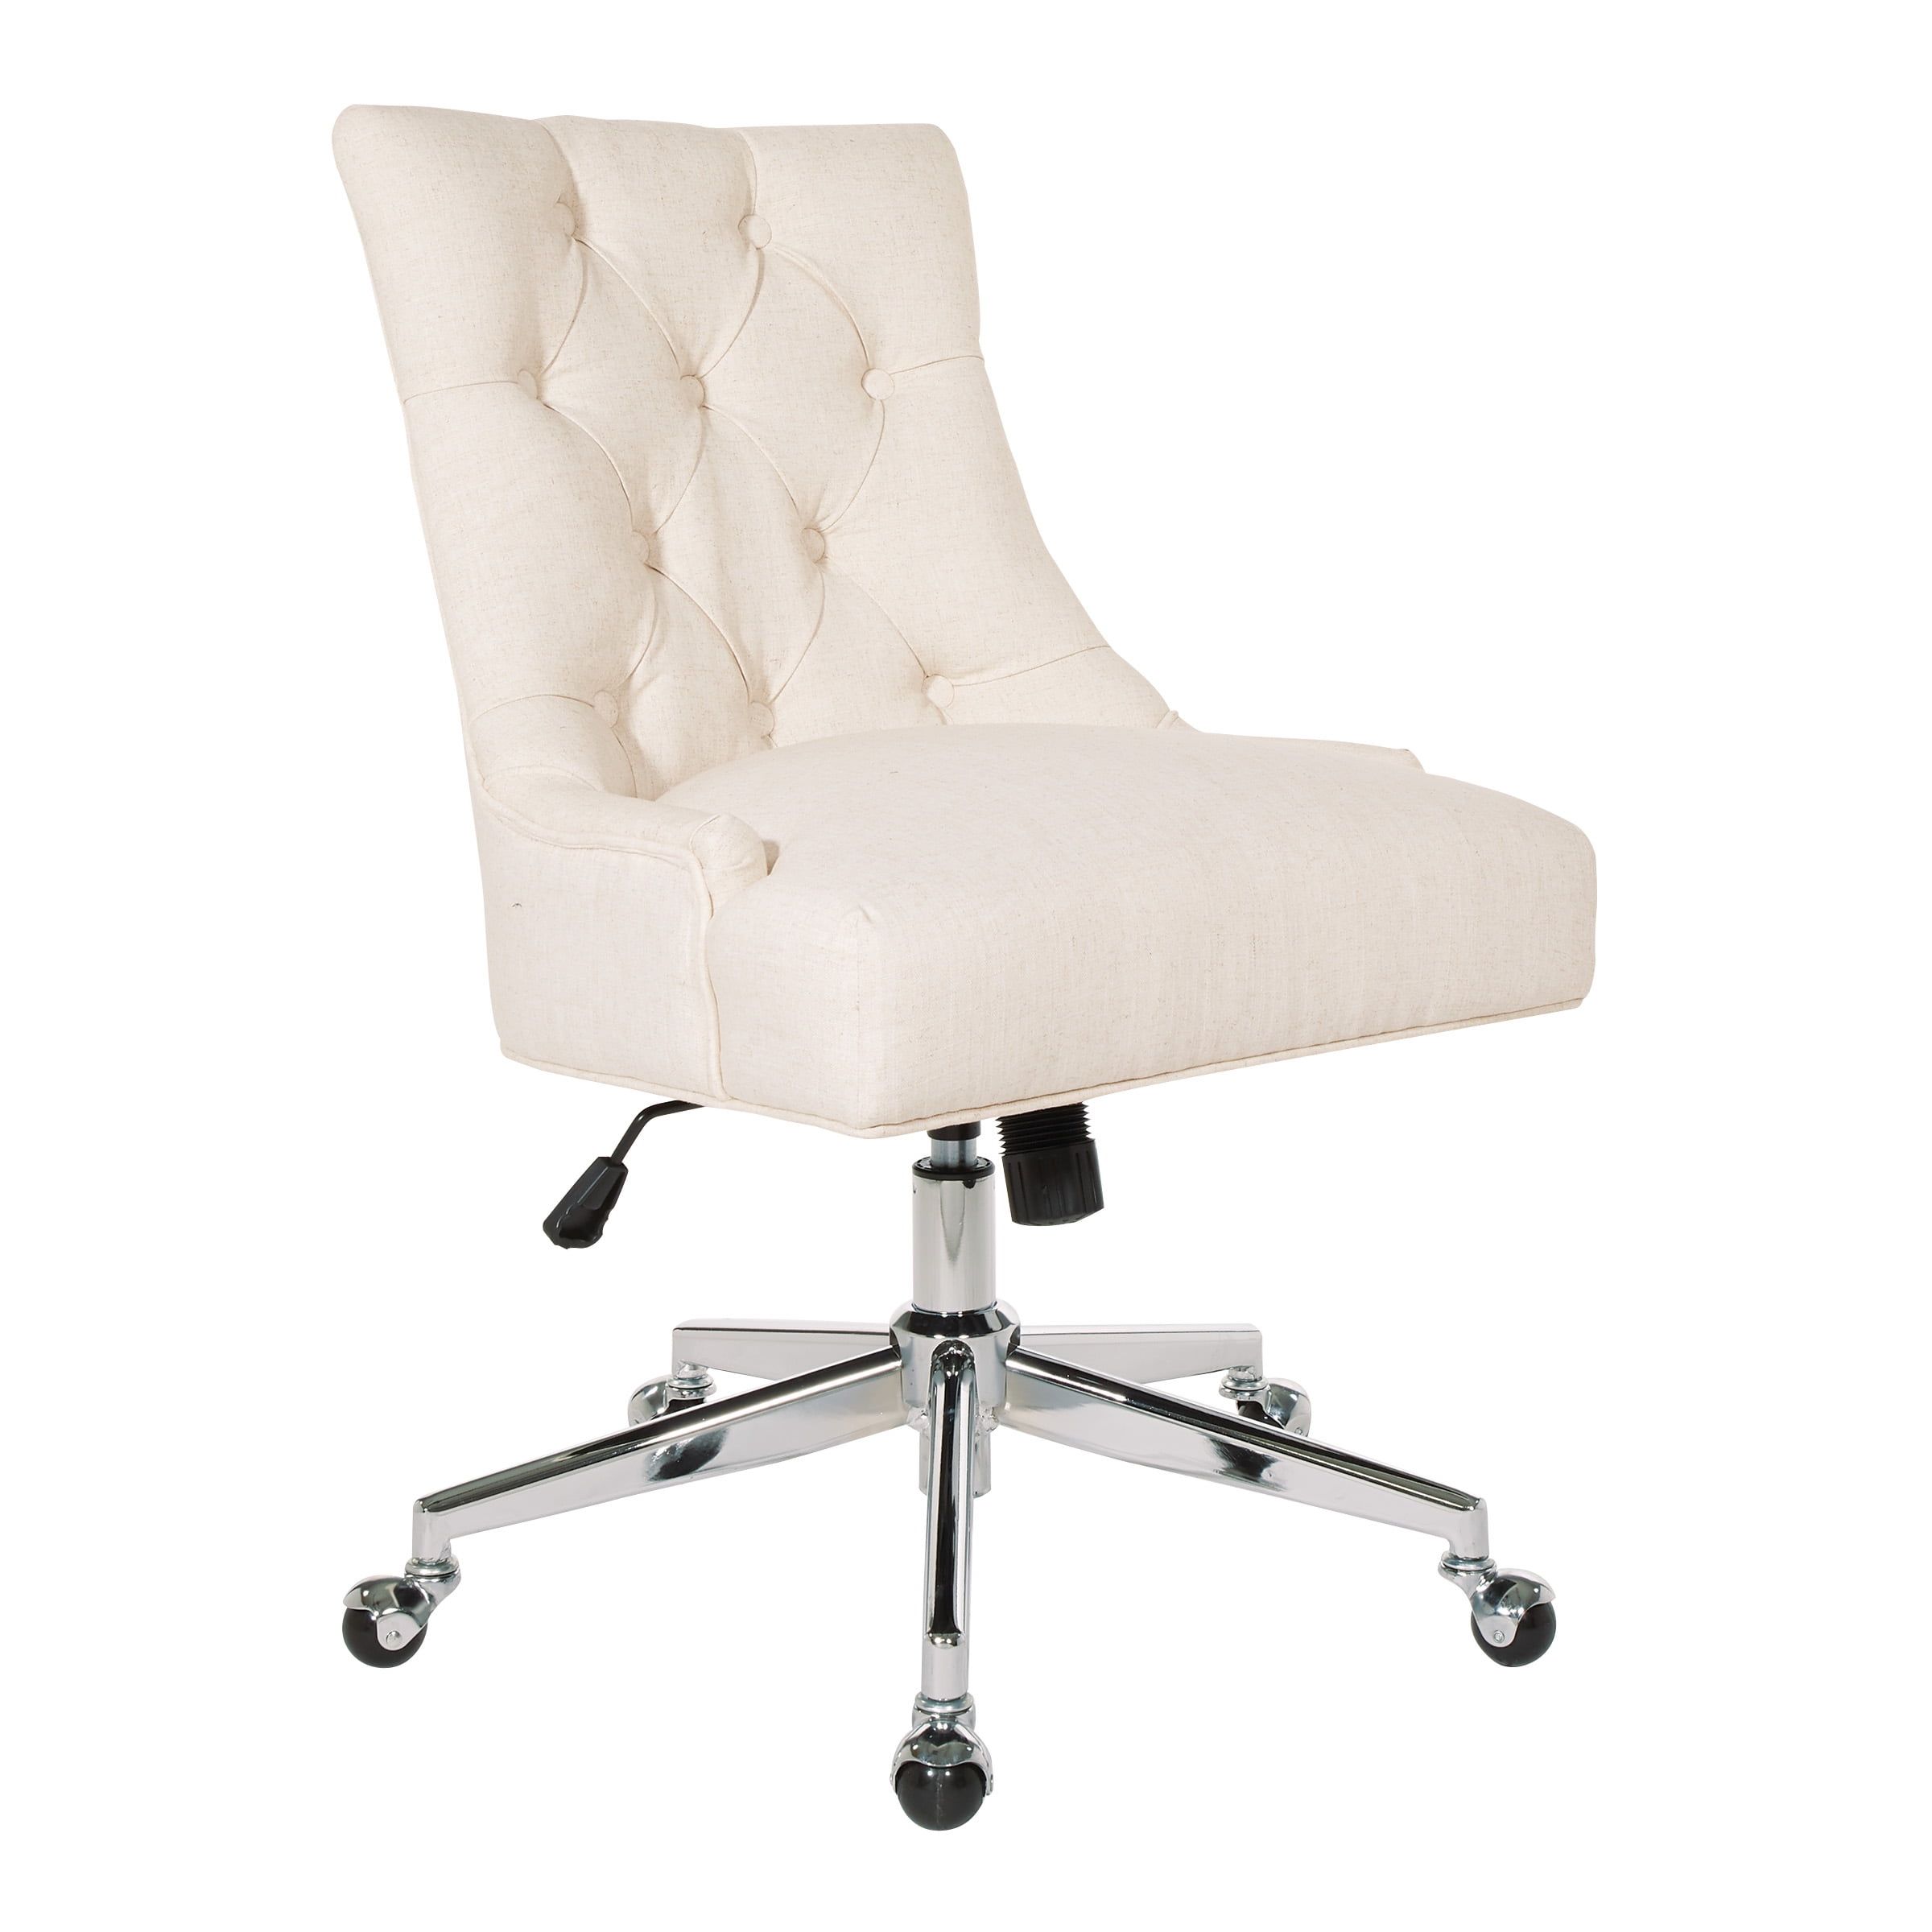 Amelia White Fabric Armless Swivel Office Chair with Chrome Base